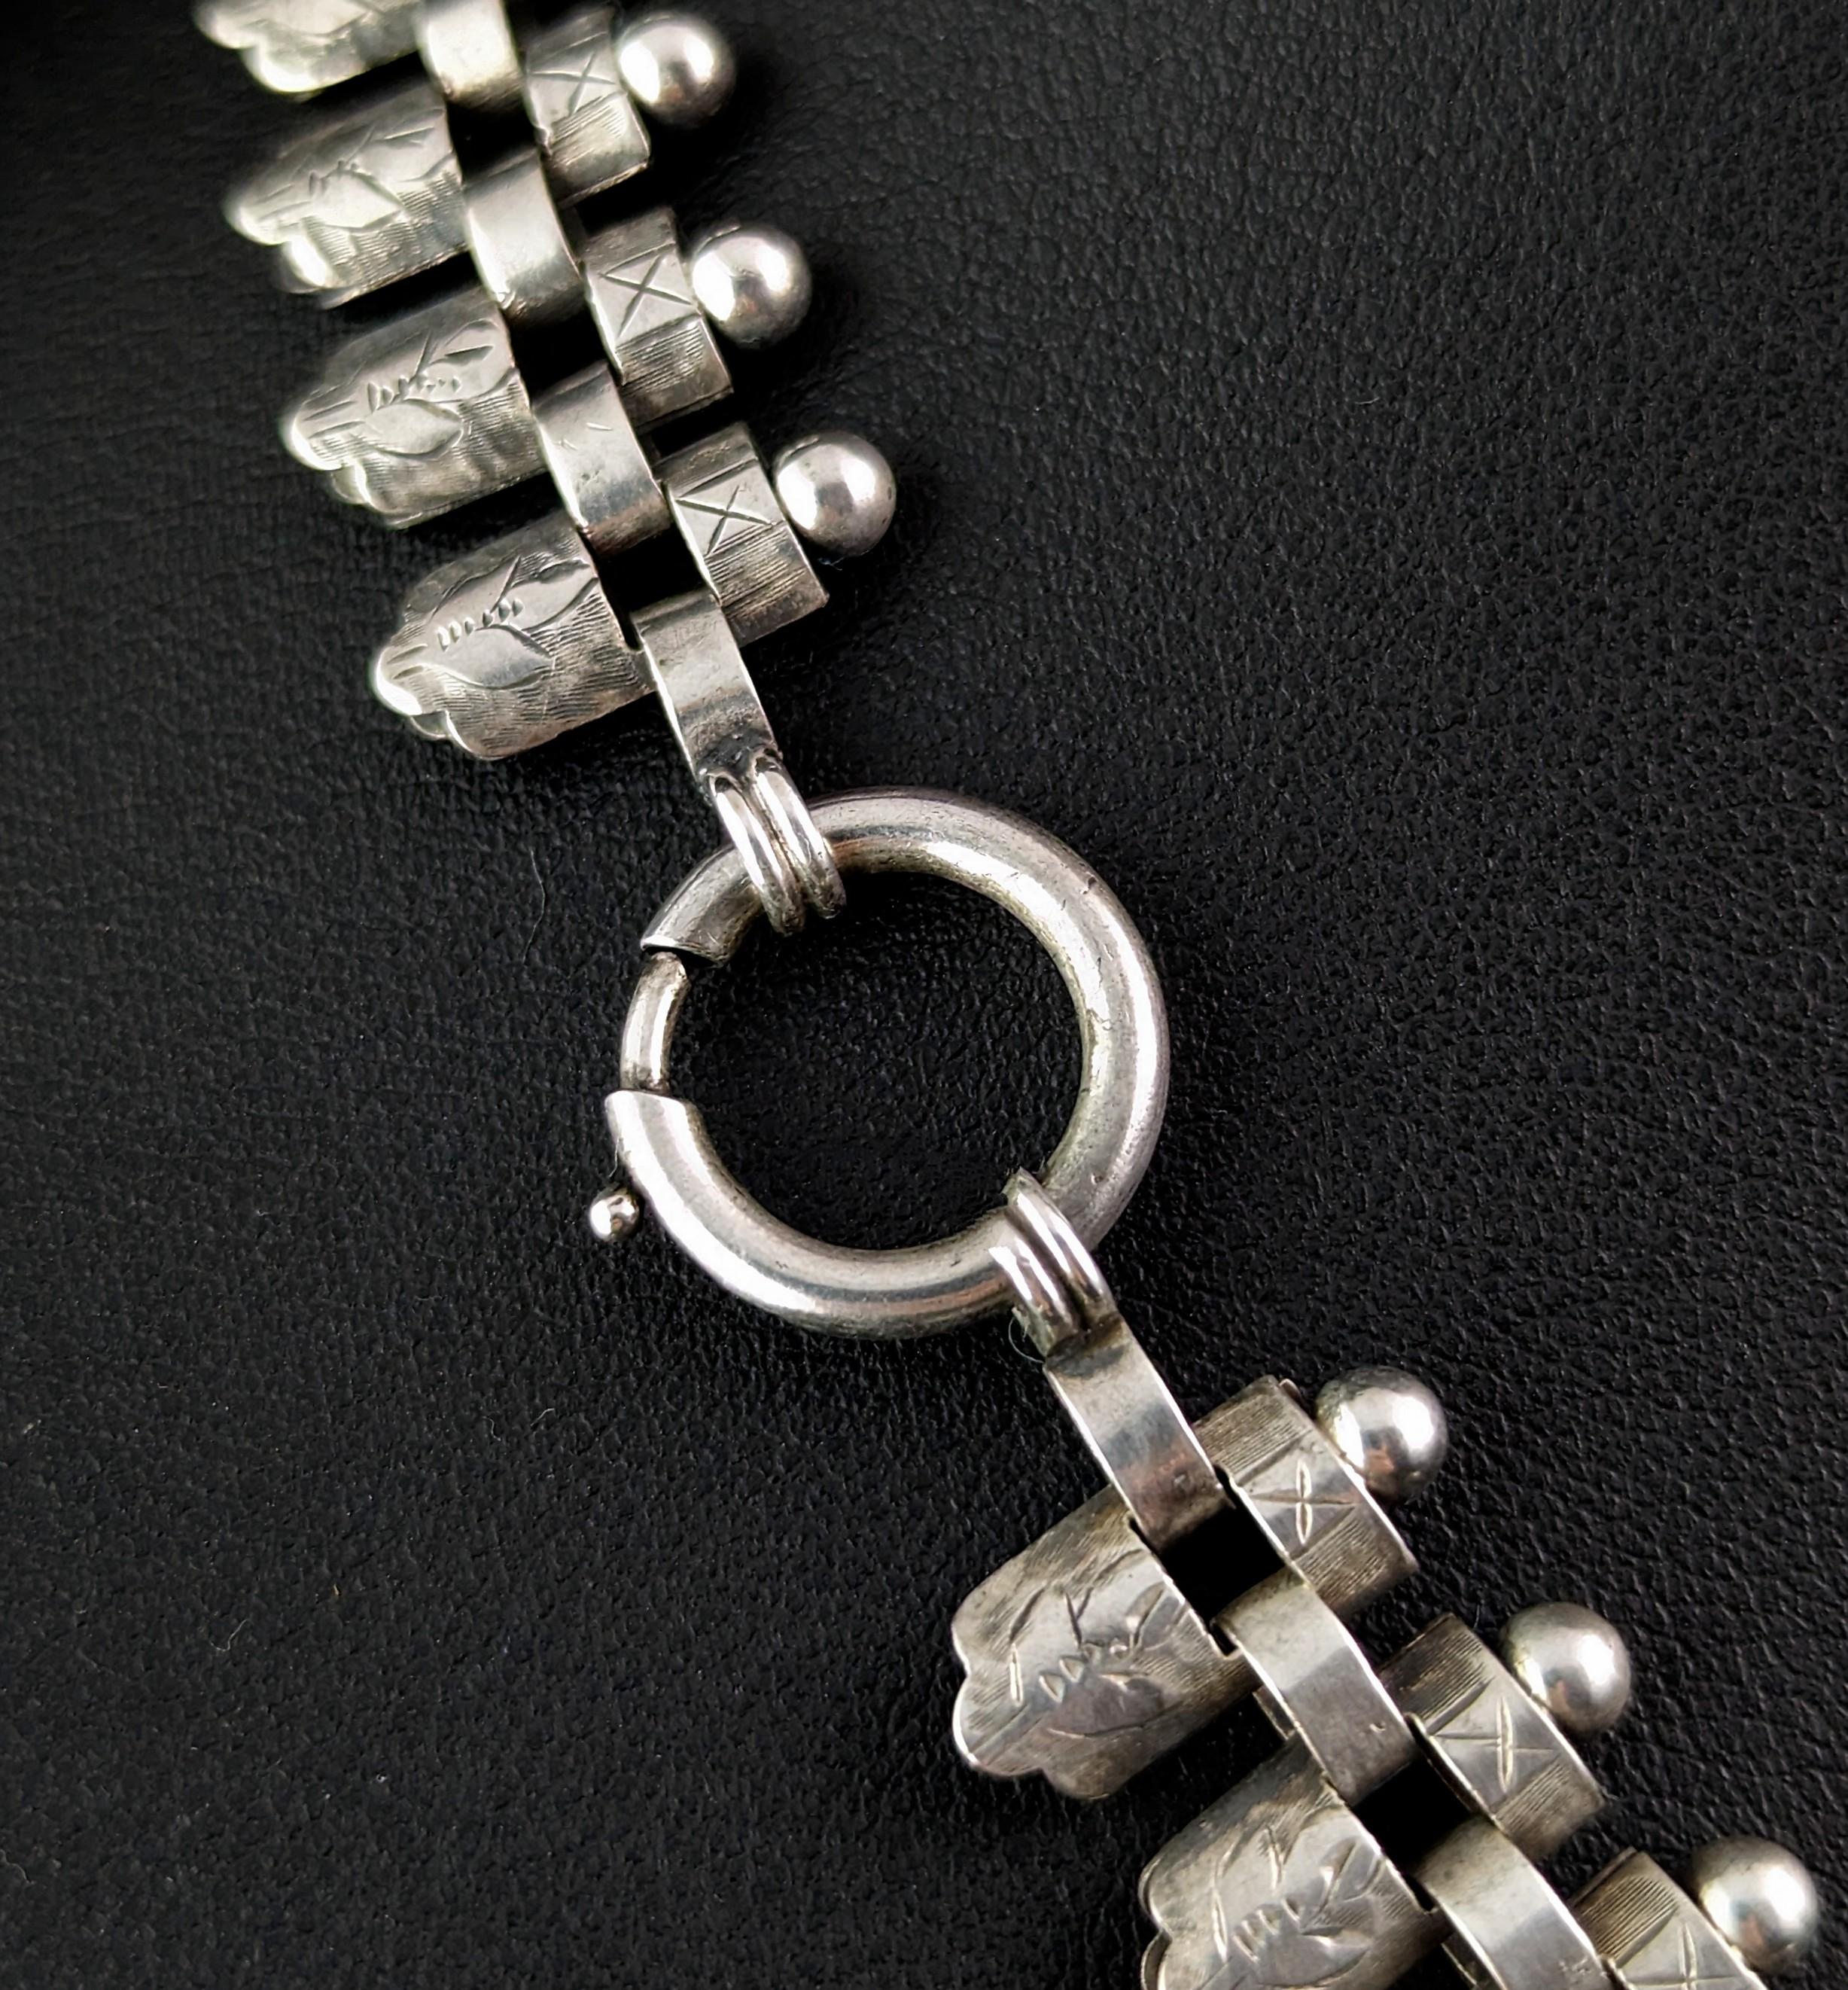 Aesthetic Movement Antique sterling silver book chain necklace, Victorian aesthetic era 